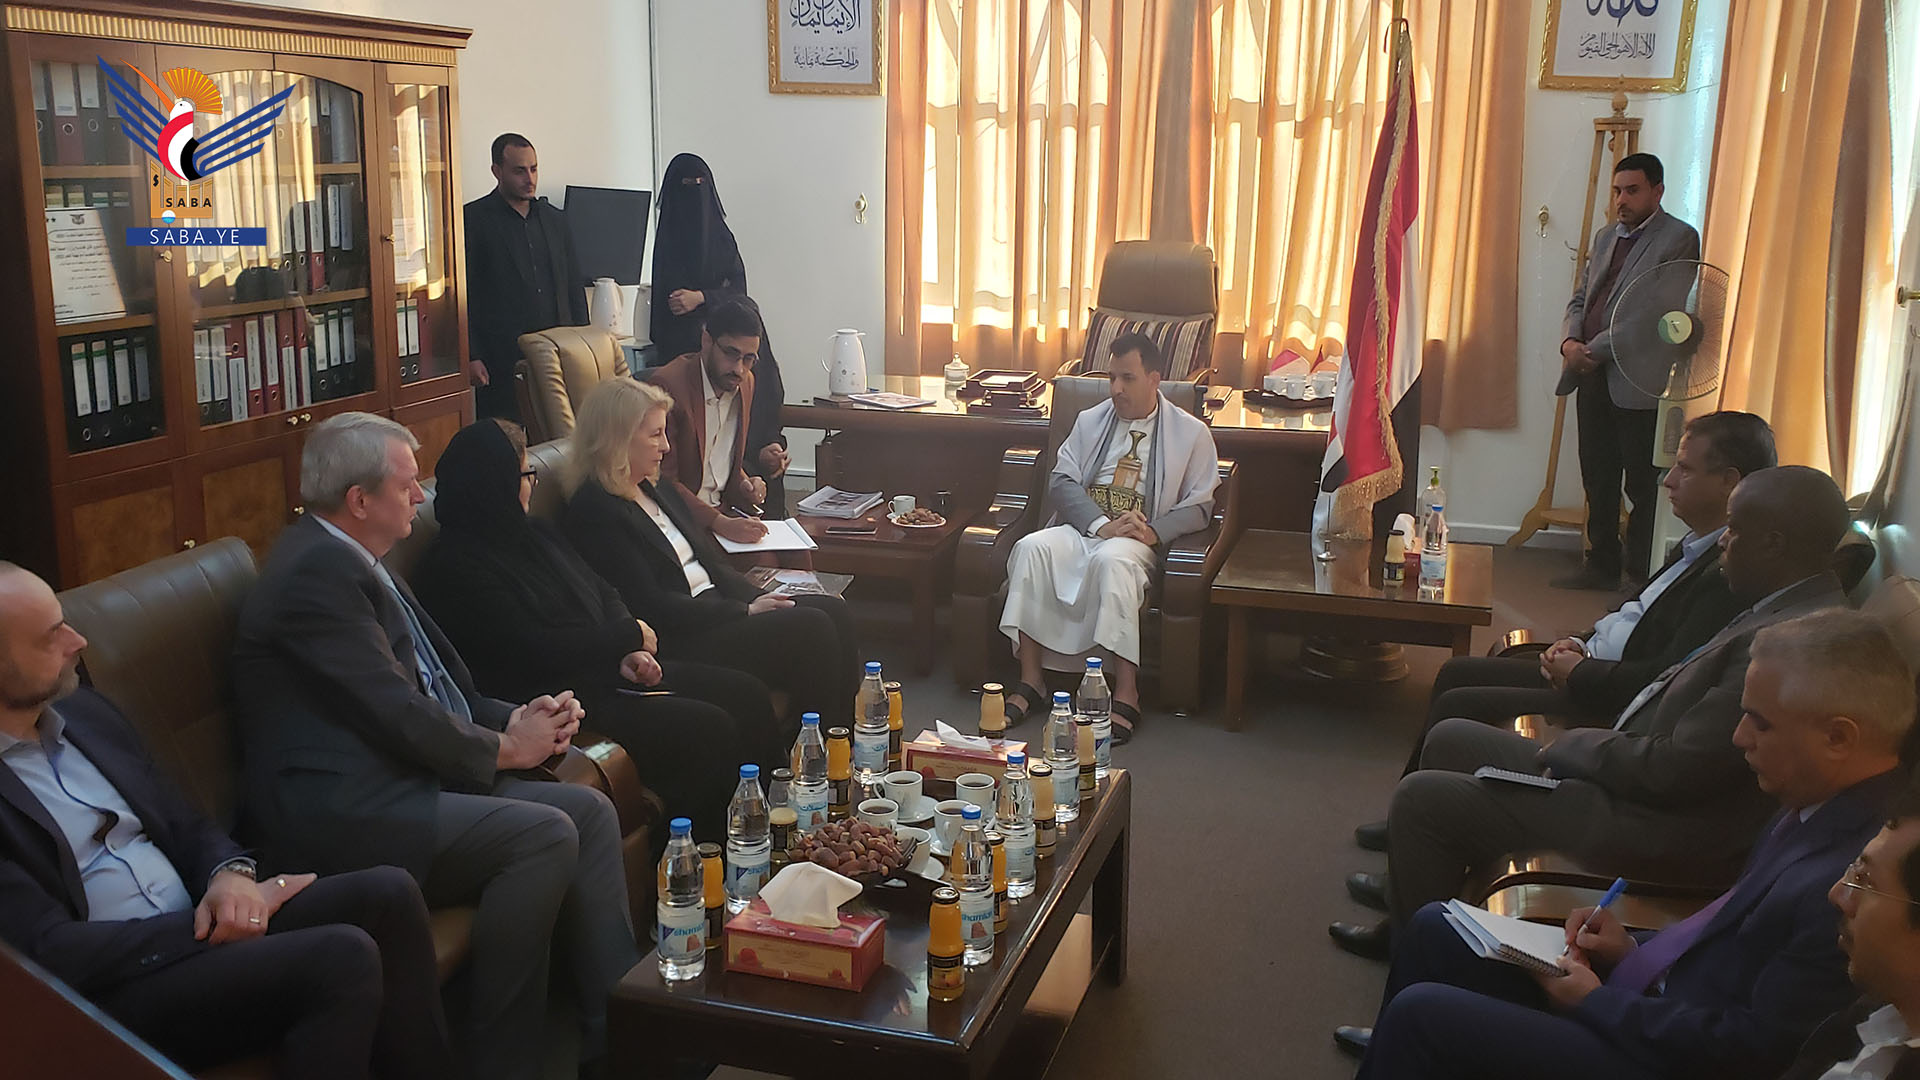 Health Minister meets Executive Director of UNICEF